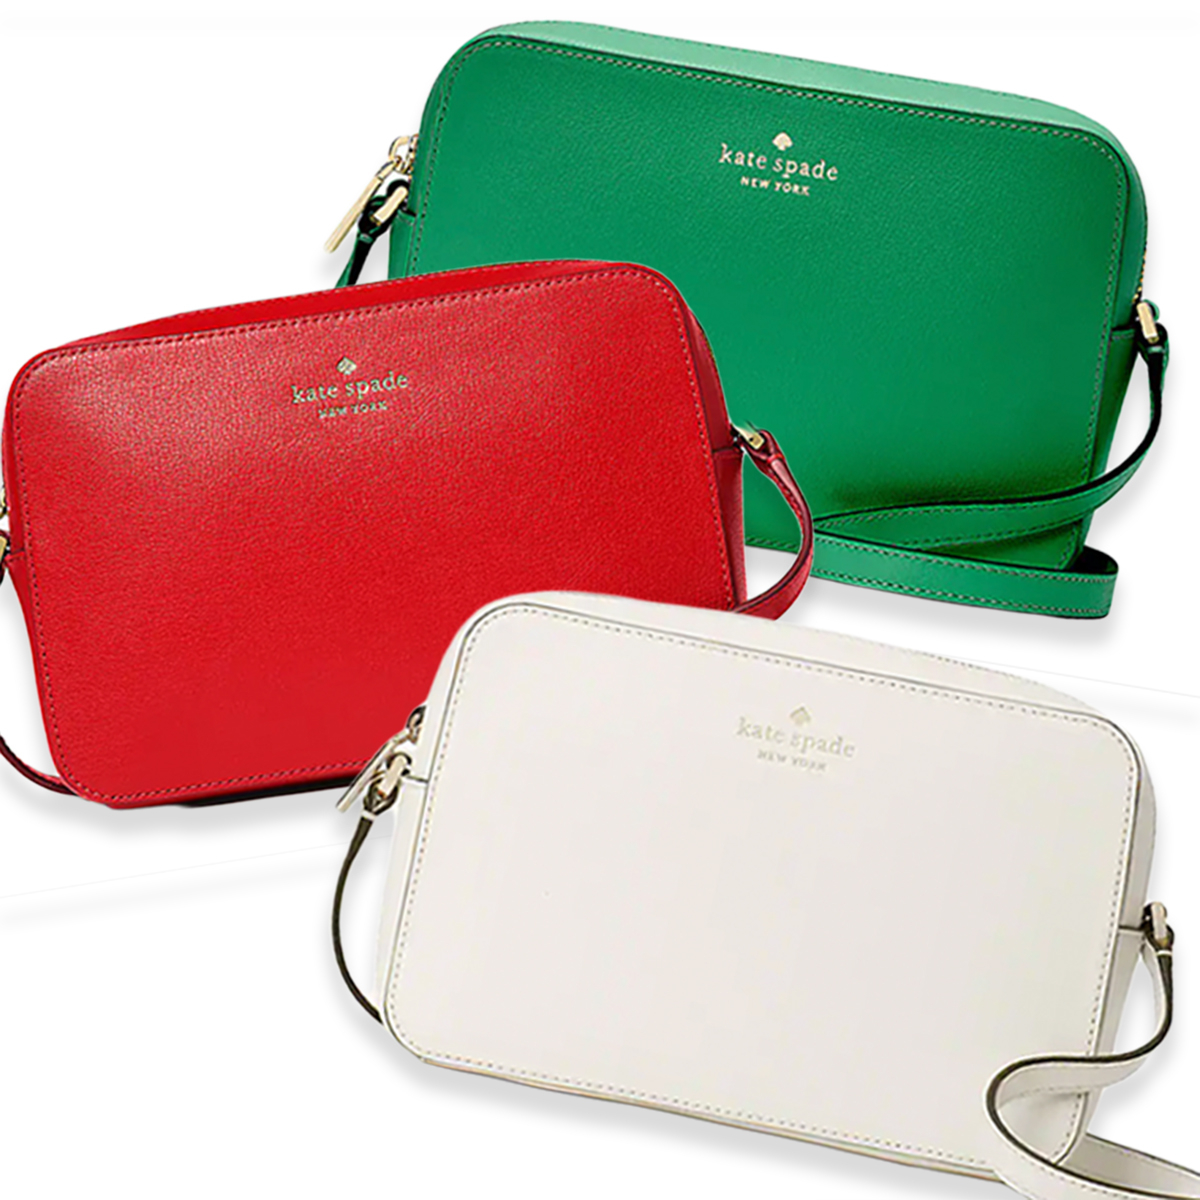 Kate Spade 24-Hour Flash Deal: Get a $280 Crossbody Bag for Just $87